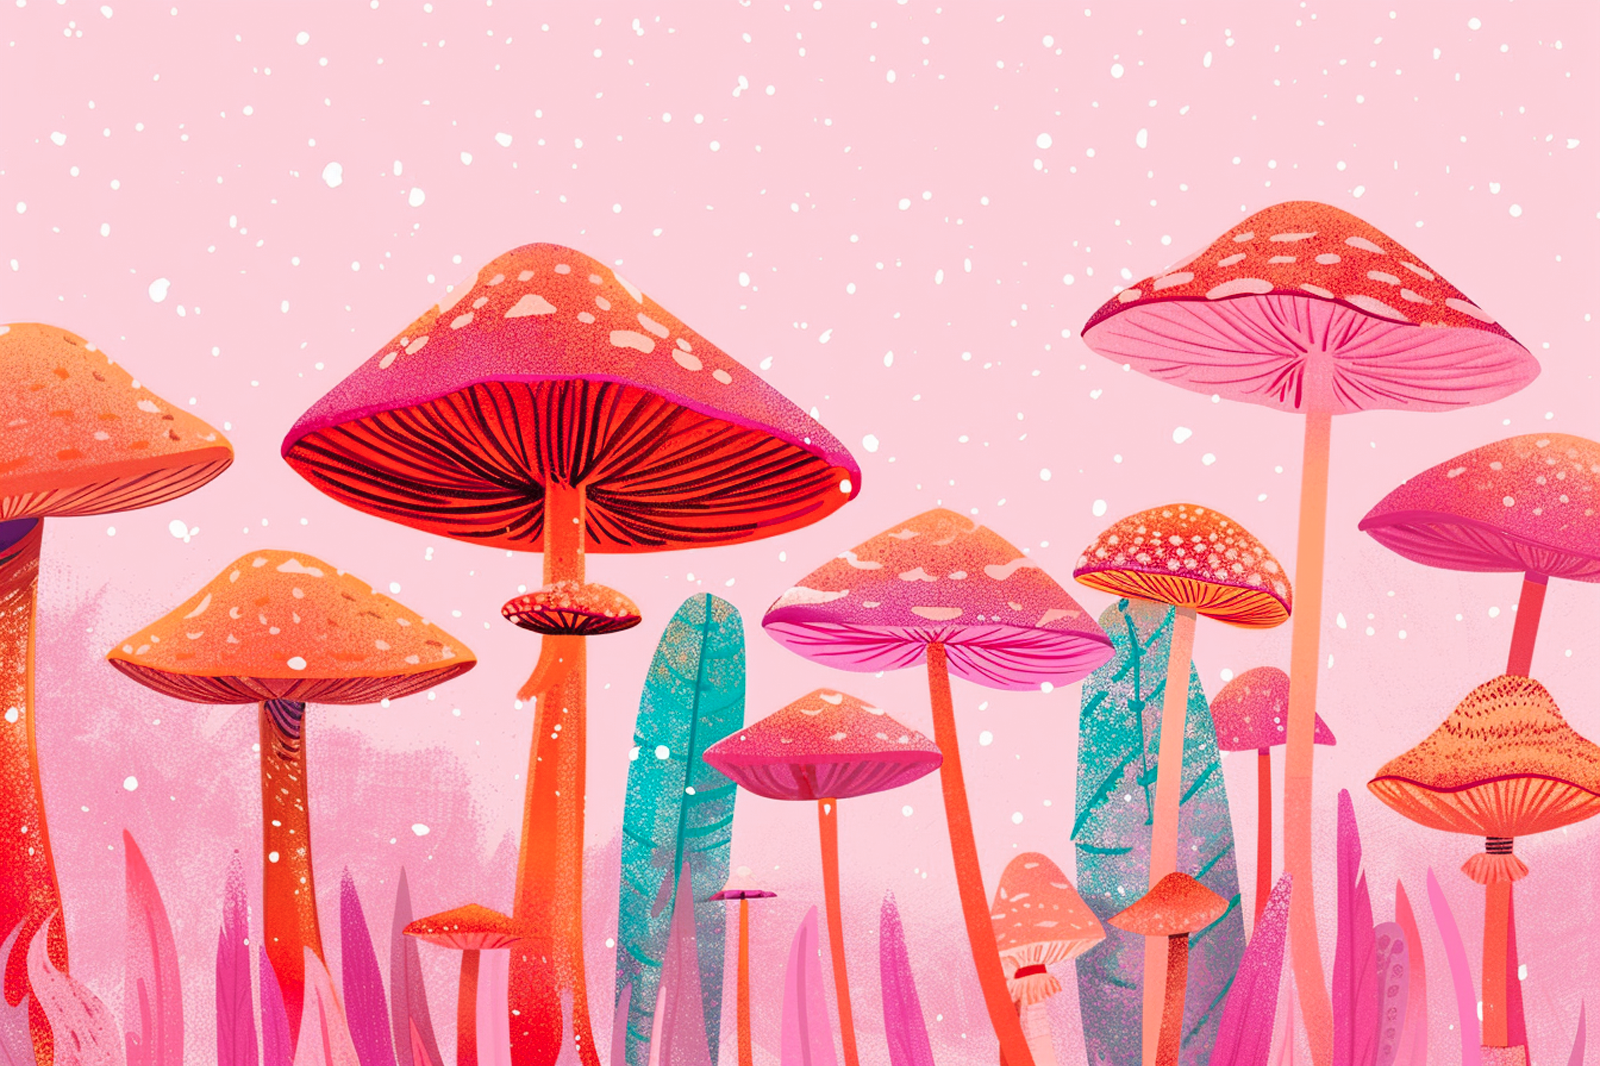 Illustration of a field with multicolored mushrooms.